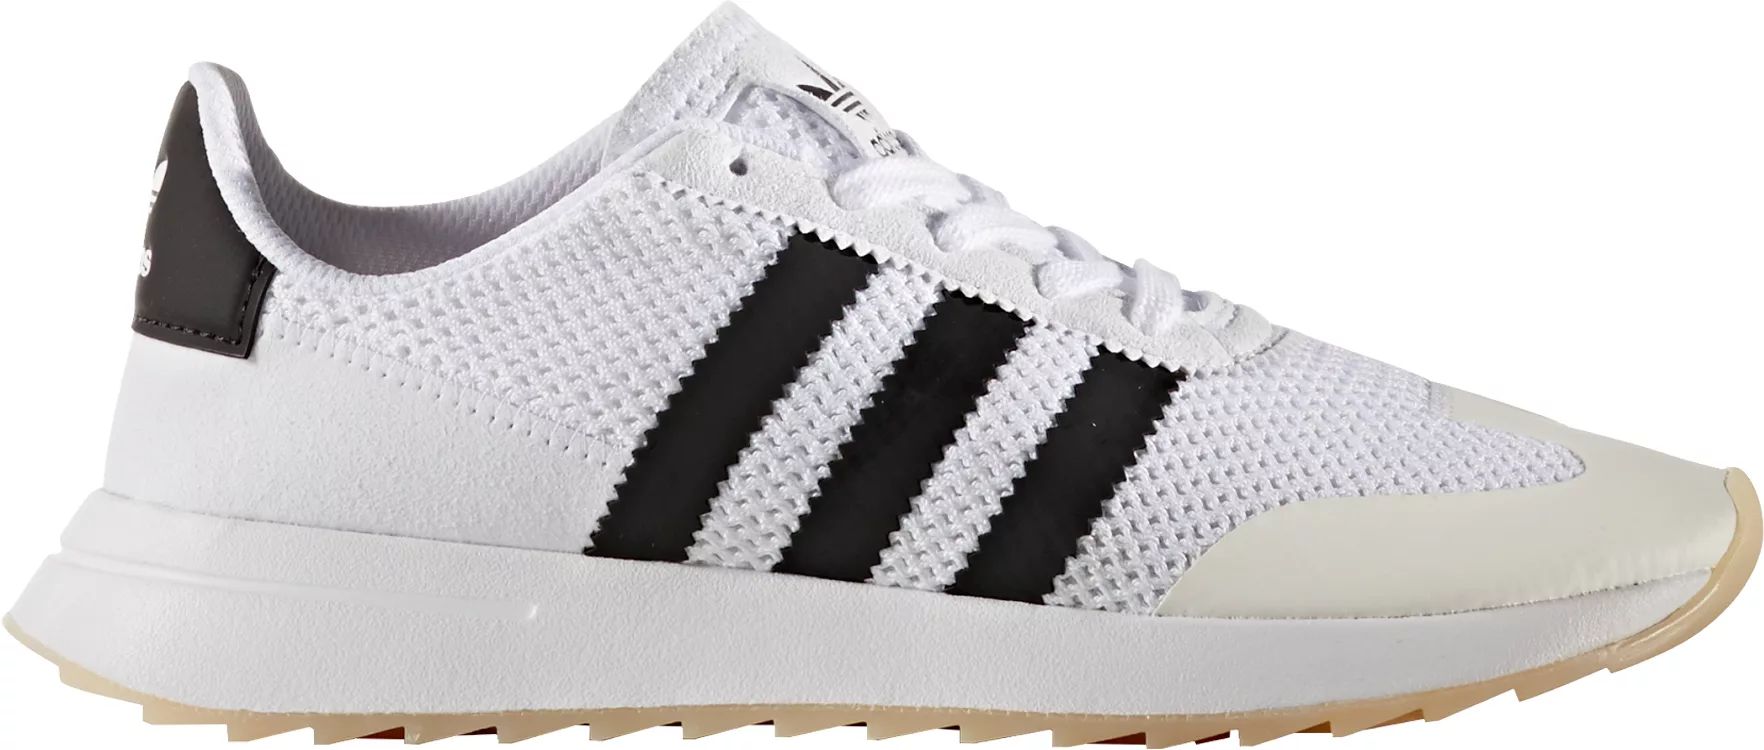 adidas Originals Women's Flashback Shoes, Size: 9.5, White | Dick's Sporting Goods